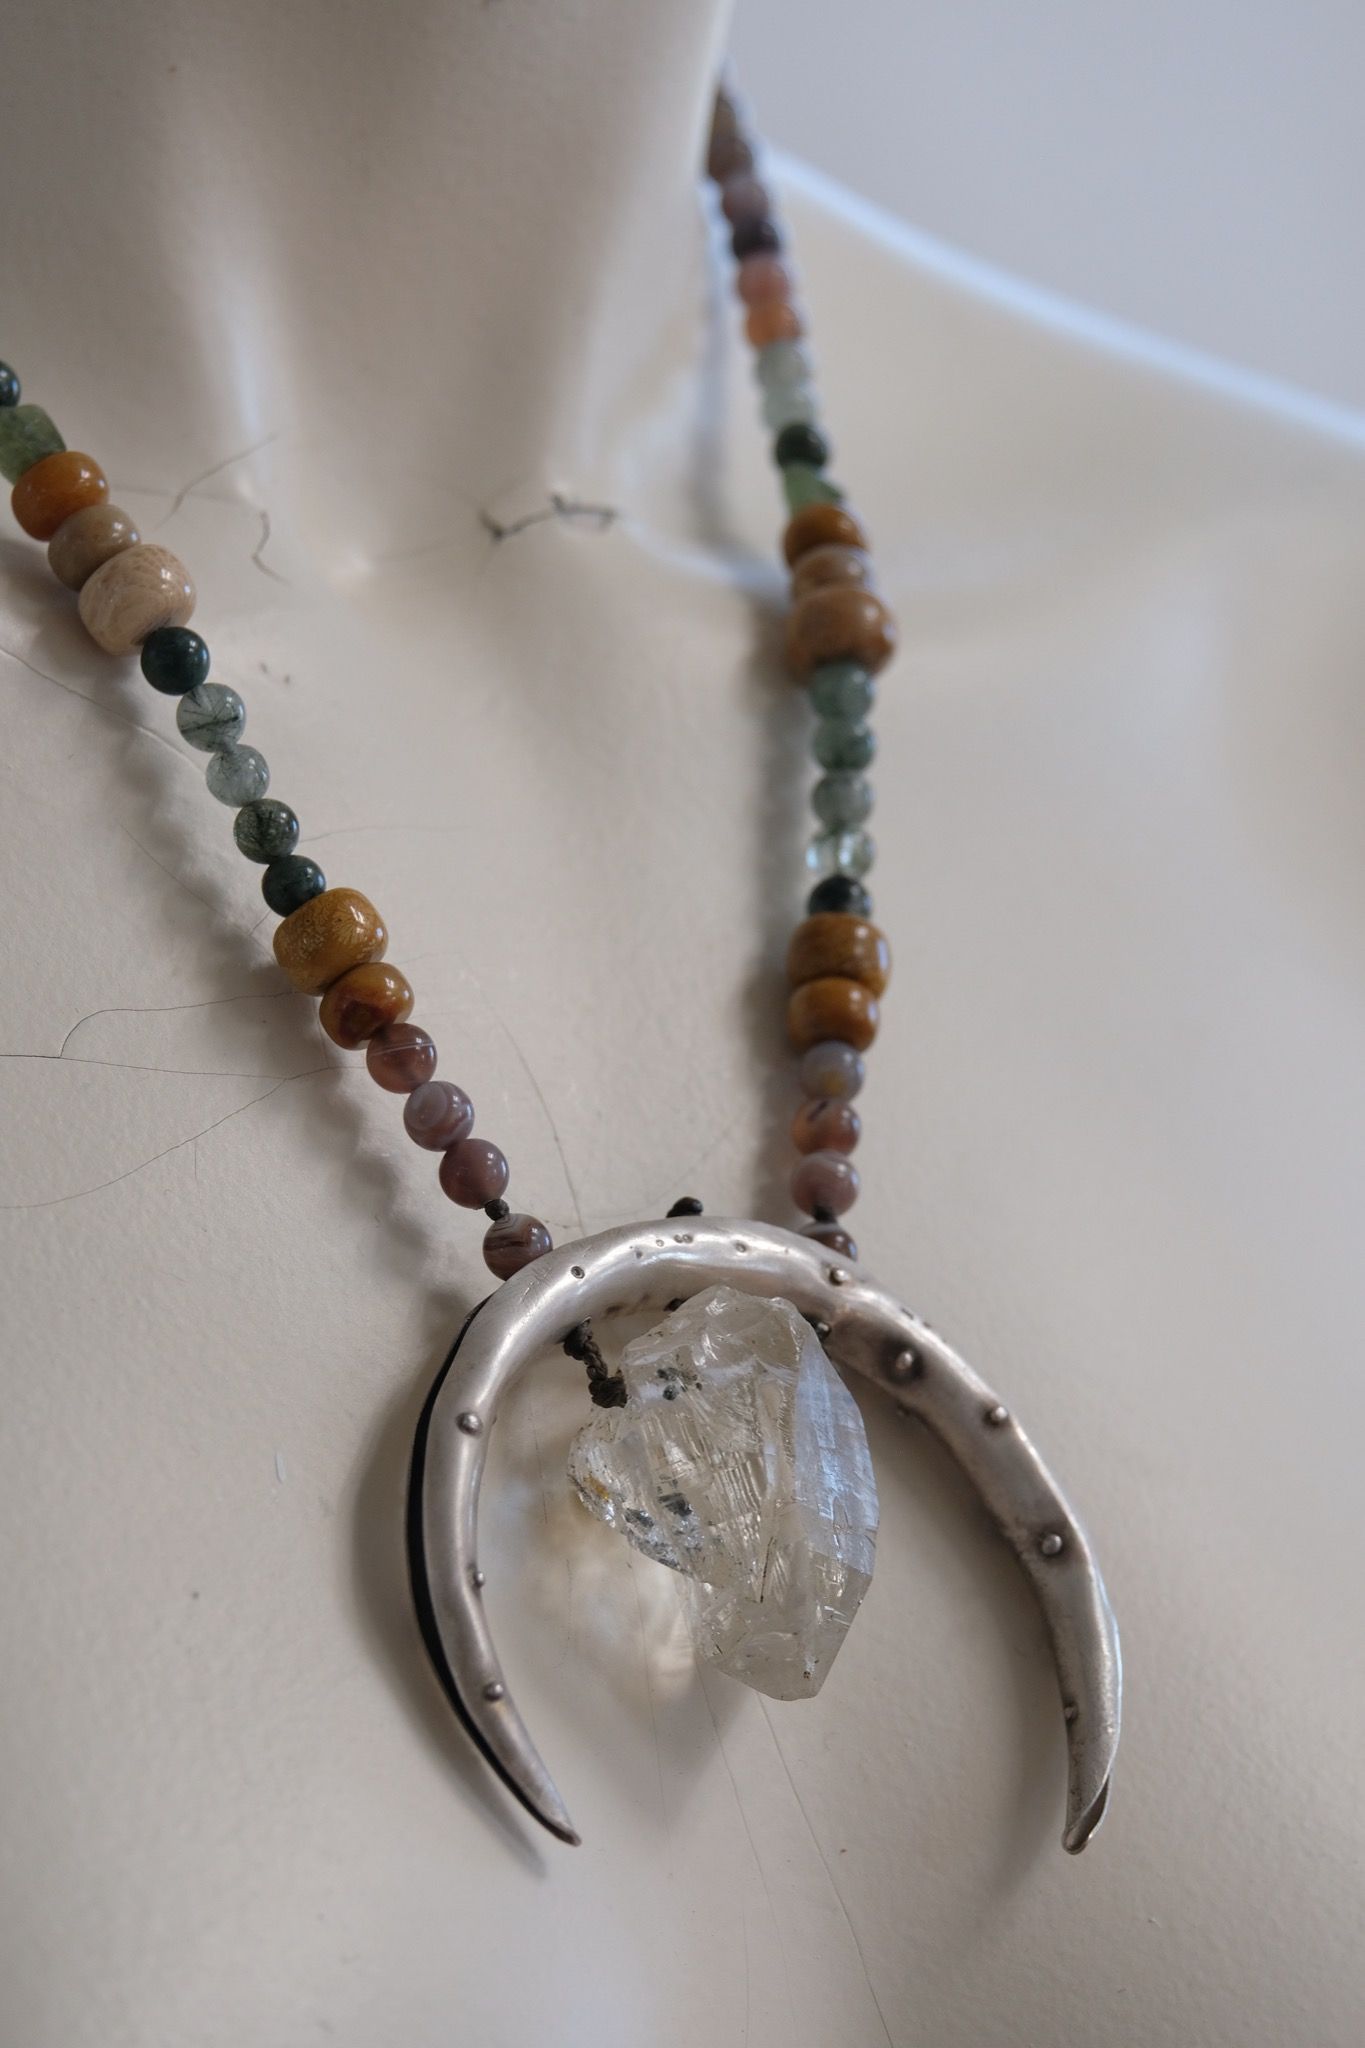 A necklace made of a silver moon, clear quartz crystal, earth-tone and green beads rests on a white mannequin